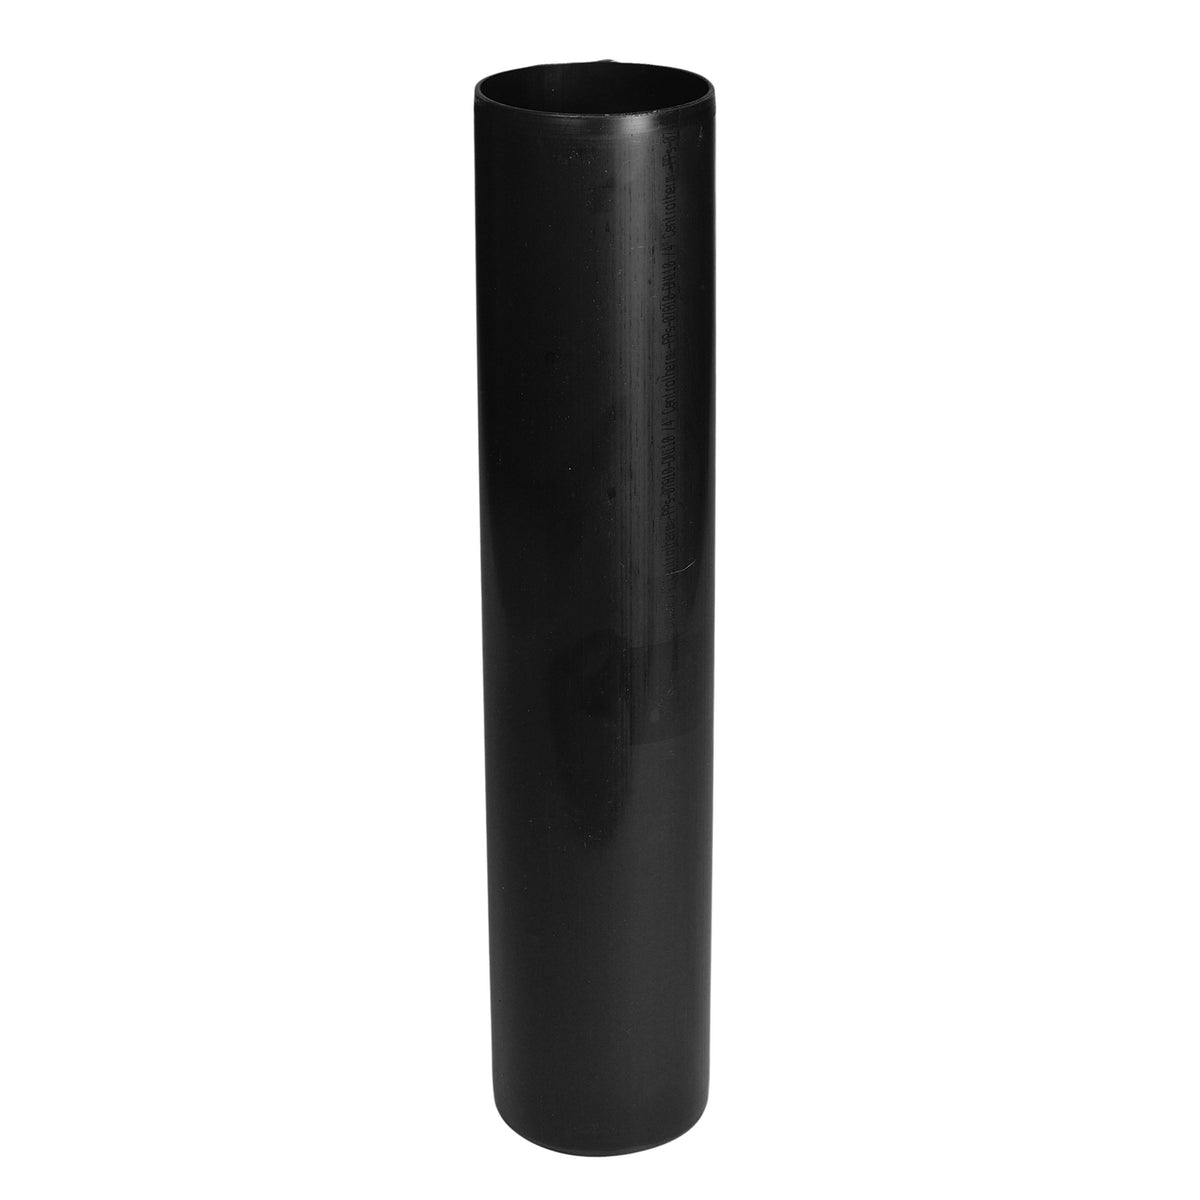 Centrotherm ISEP04 InnoFlue Residential SW Black End Pipe PPS-UV - 4" D x 19.7" L